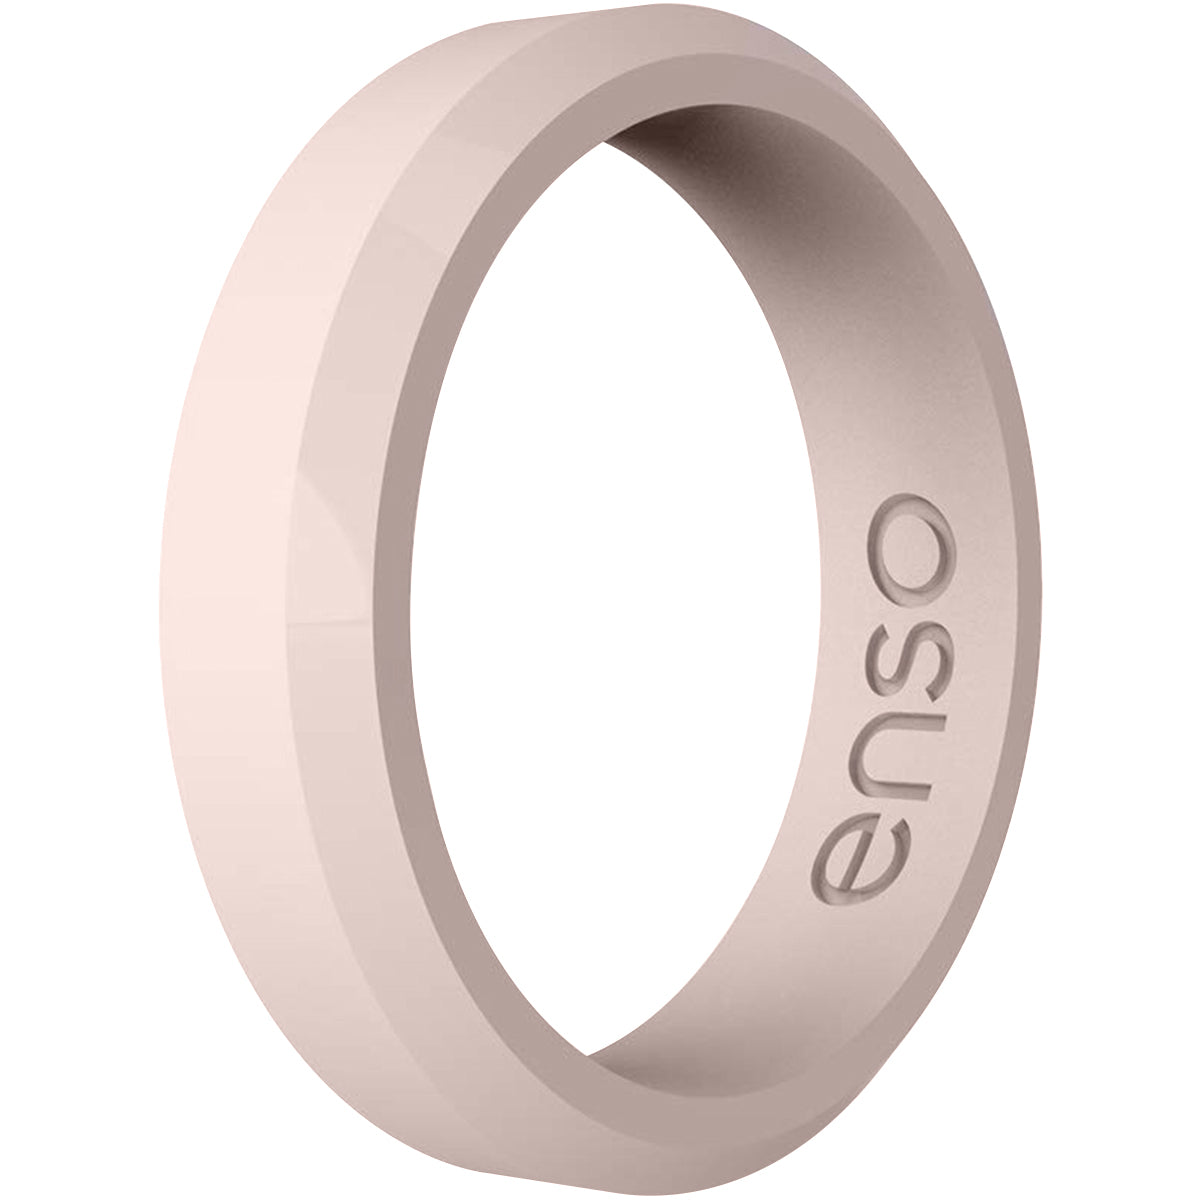 Enso Rings Thin Bevel Series Silicone Ring - Pink Sand Enso Rings